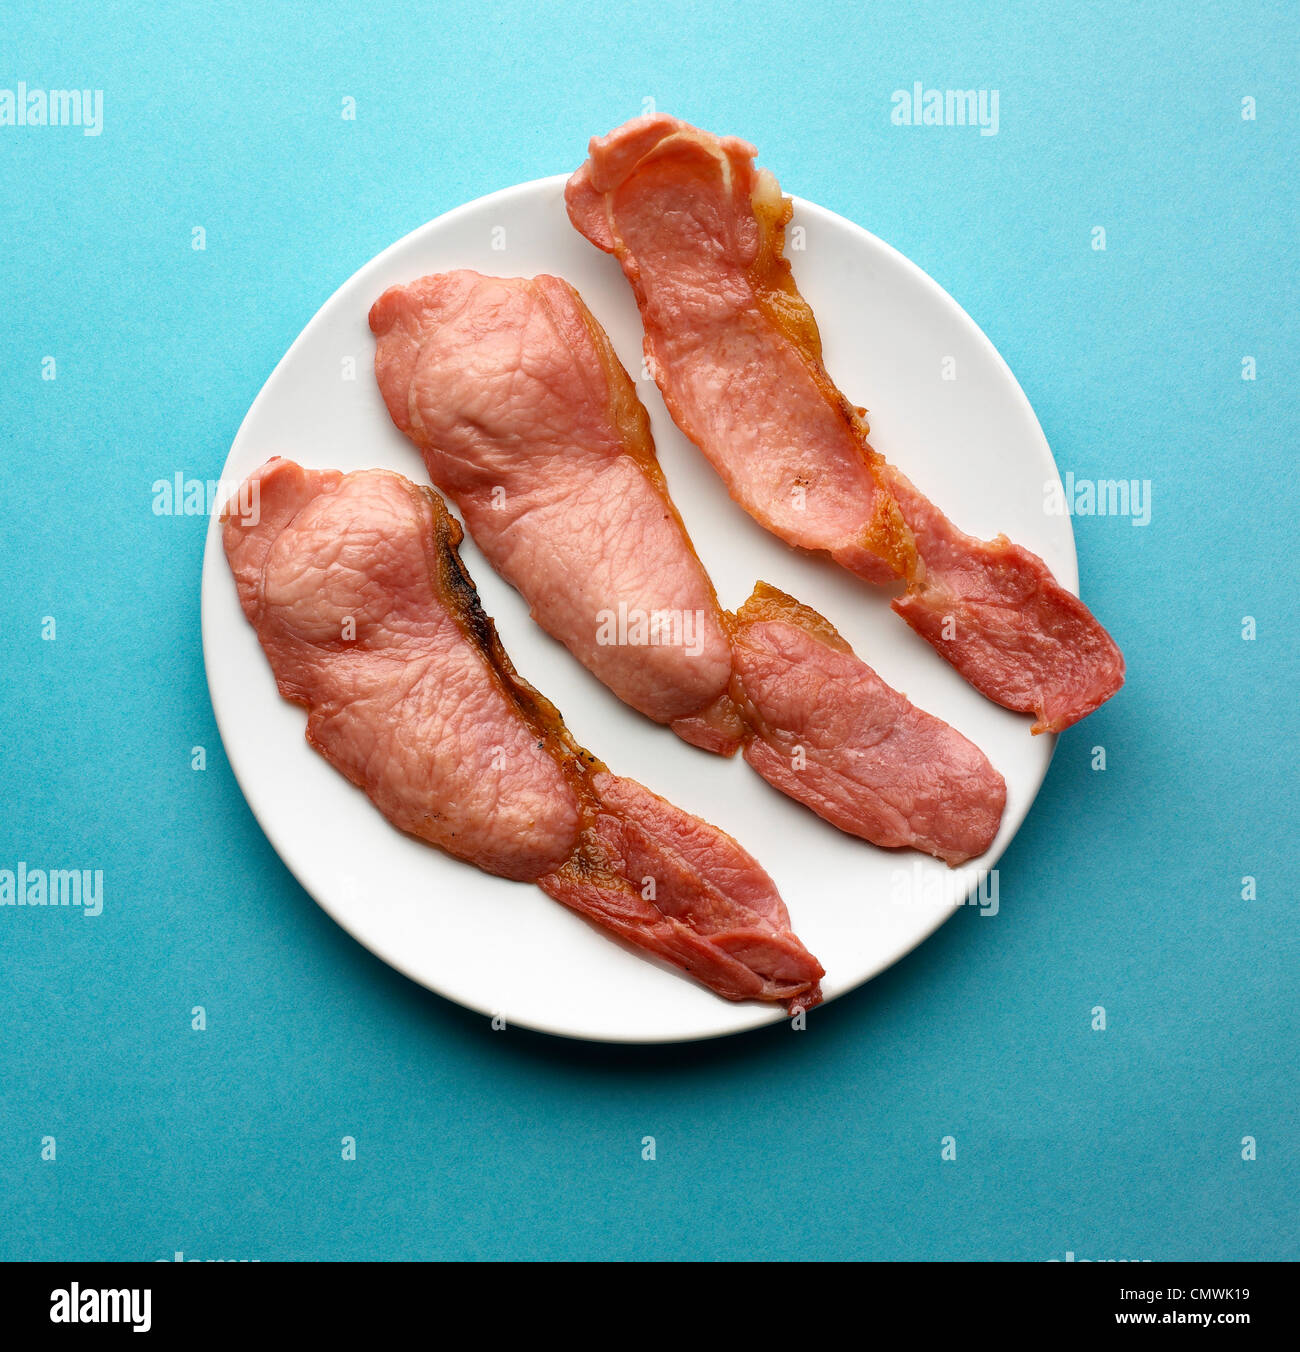 One plate of bacon Stock Photo